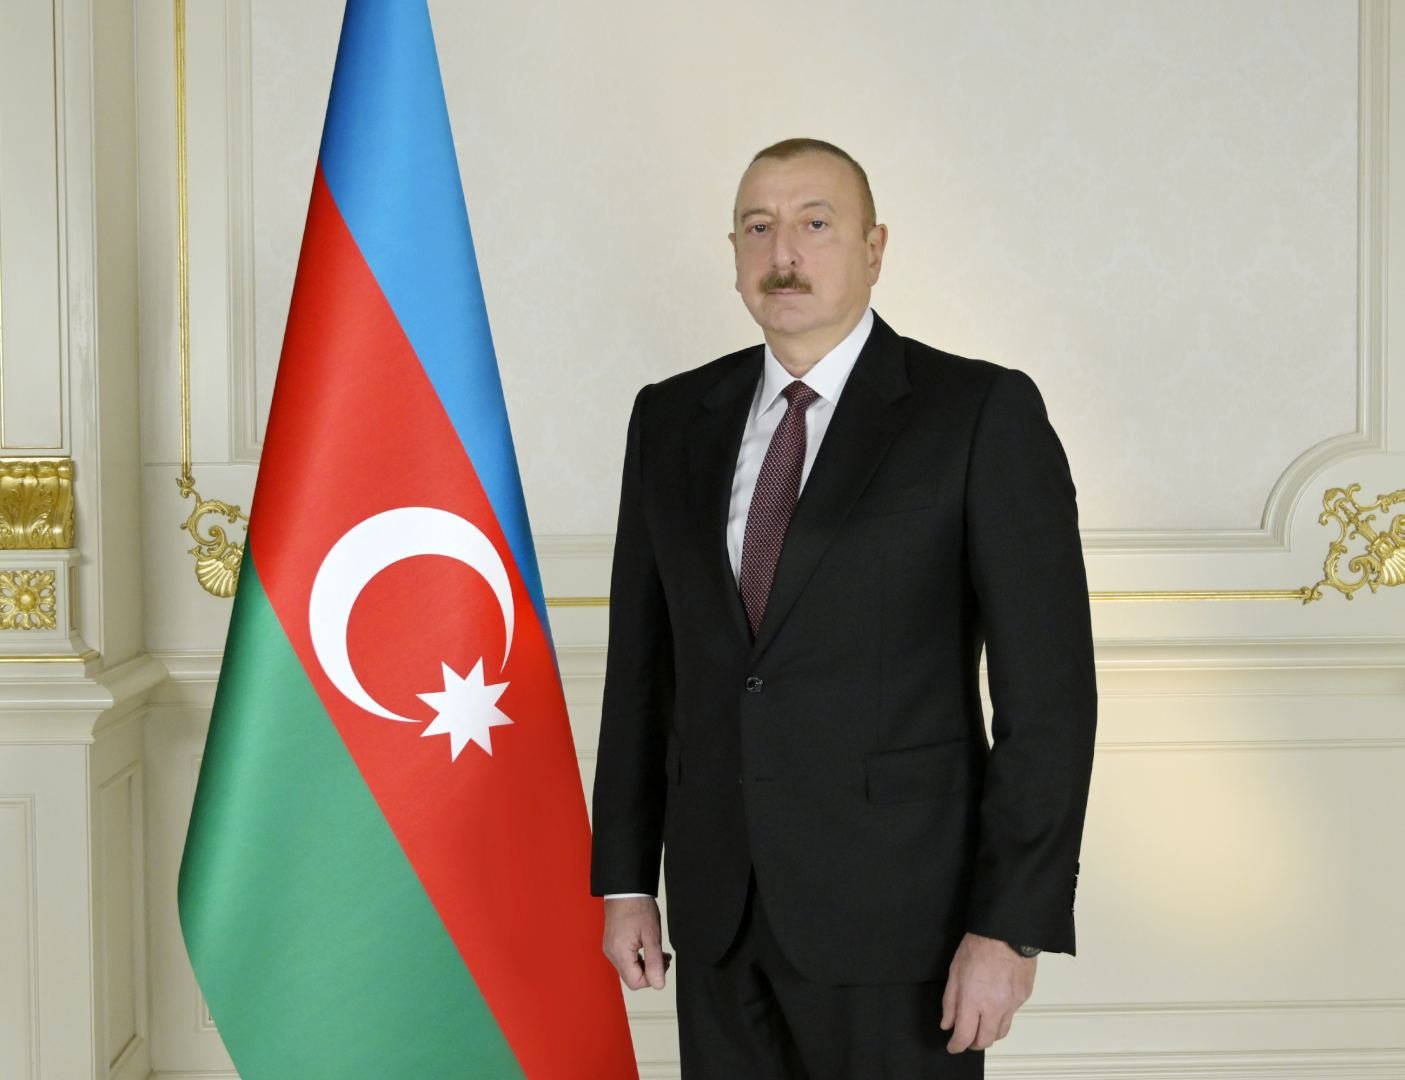 We are restoring liberated territories using our own resources - President Ilham Aliyev